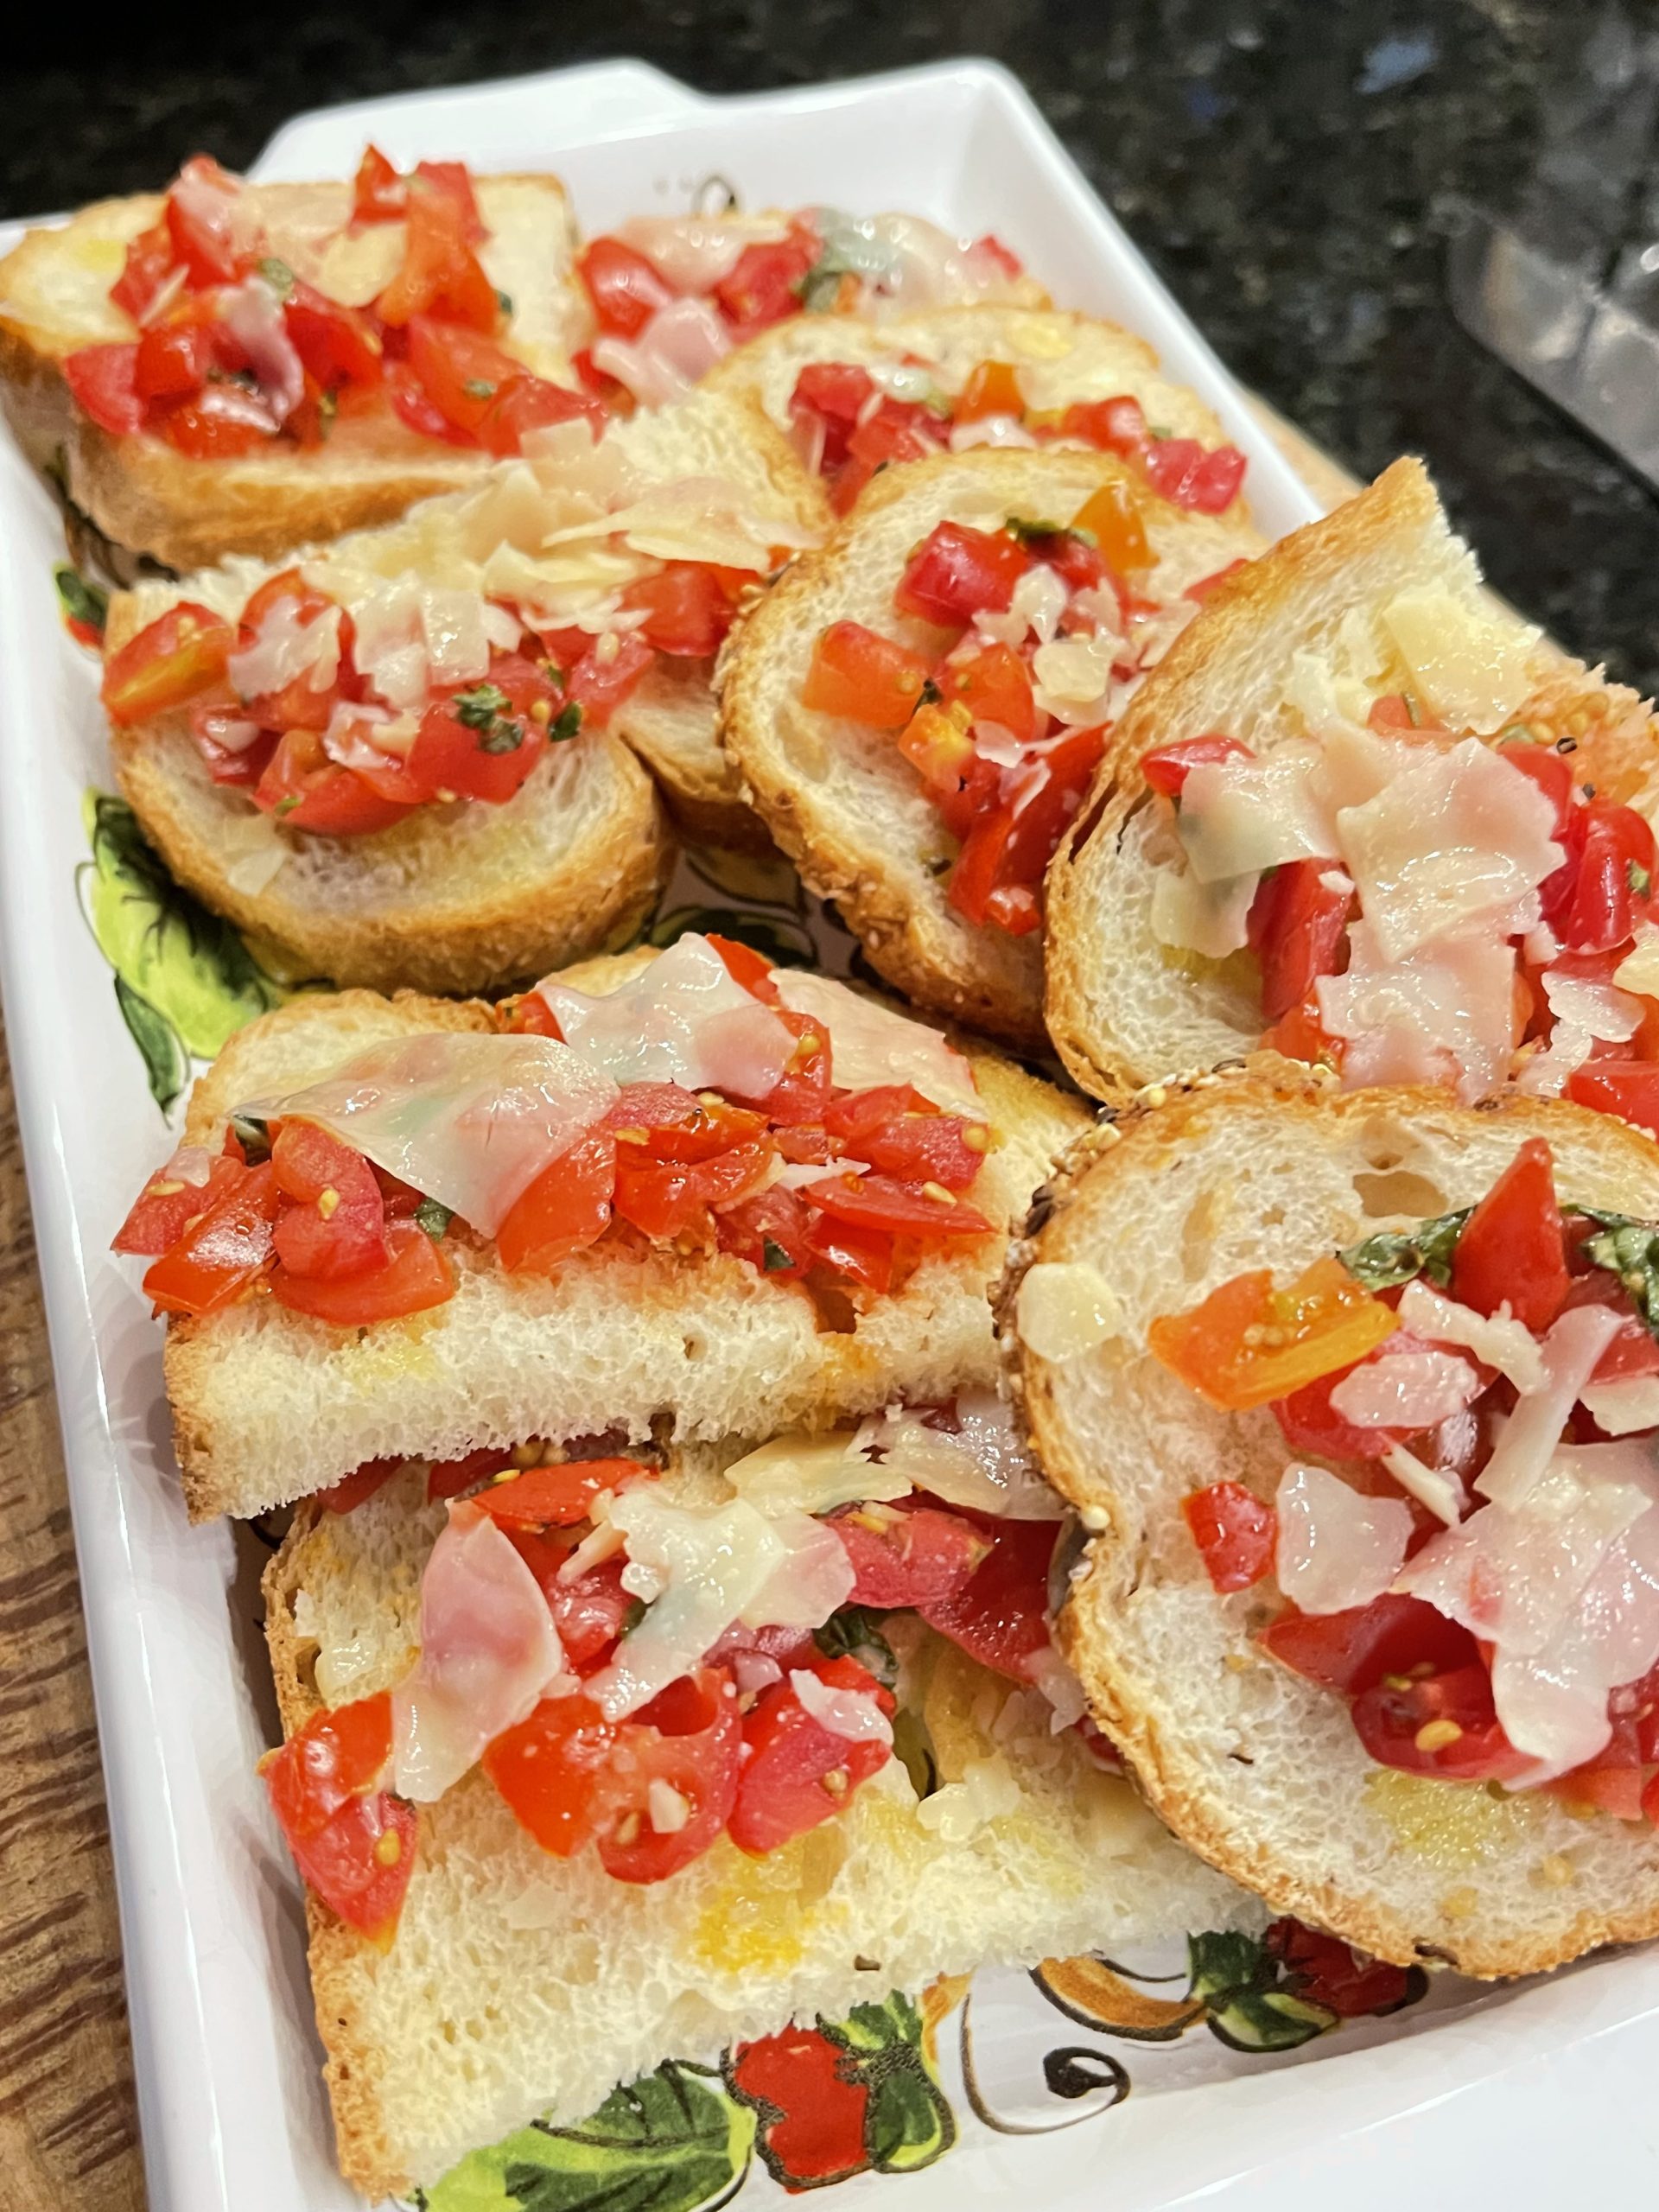 Make Ahead Bruschetta Topping – Rust Nutrition Services – Chew The Facts®